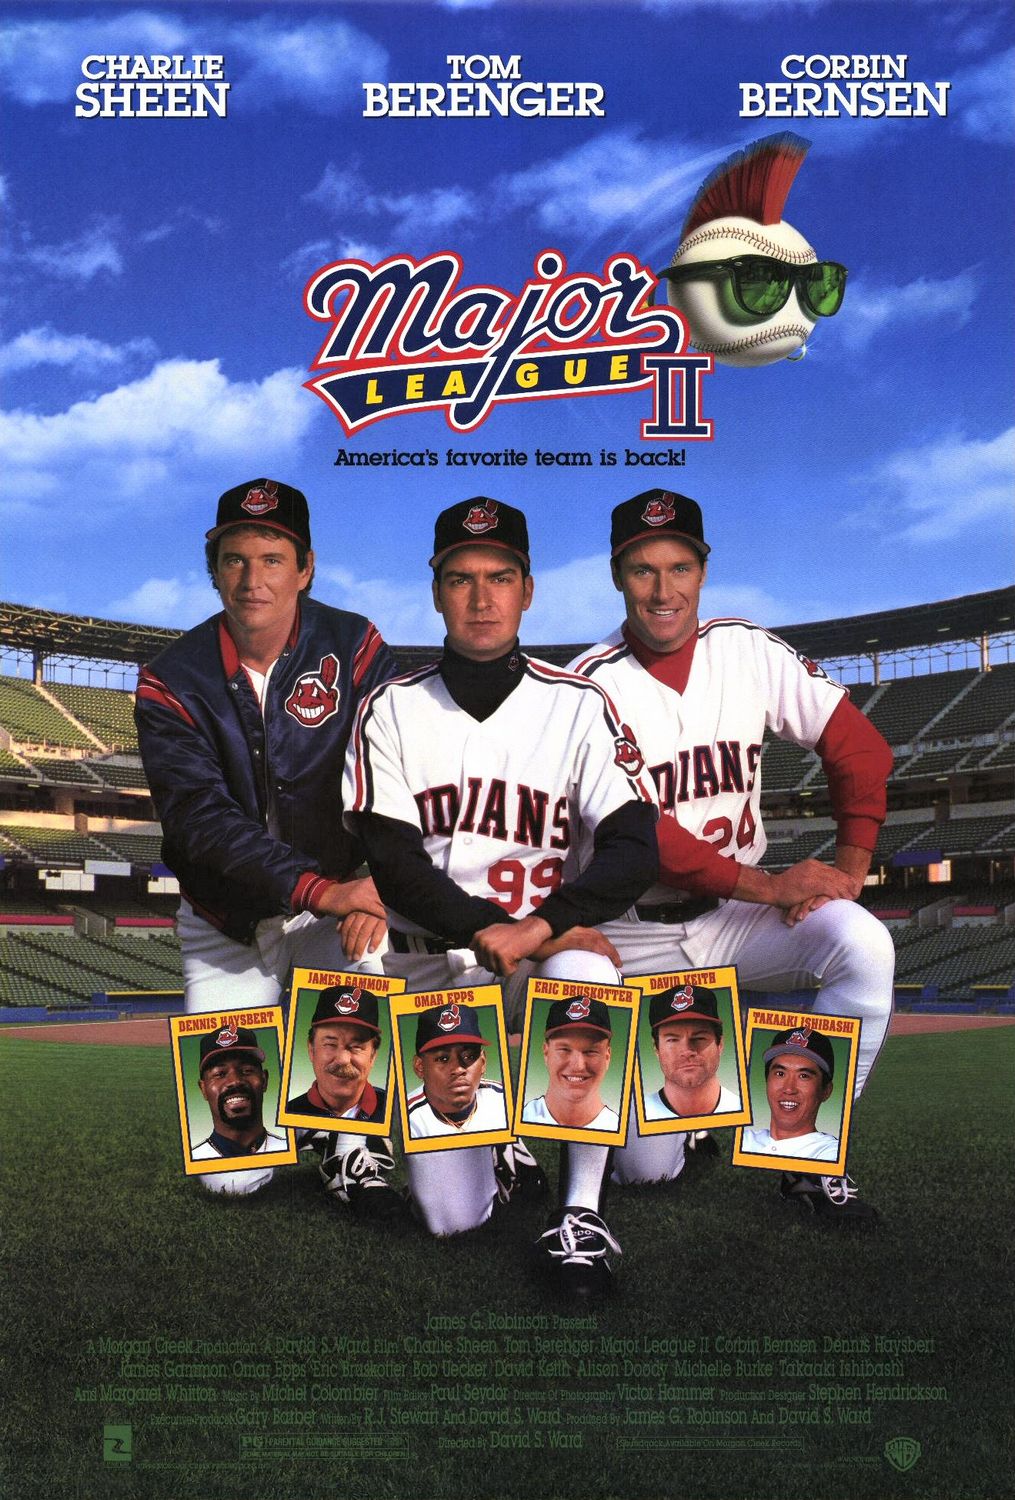 Extra Large Movie Poster Image for Major League II 